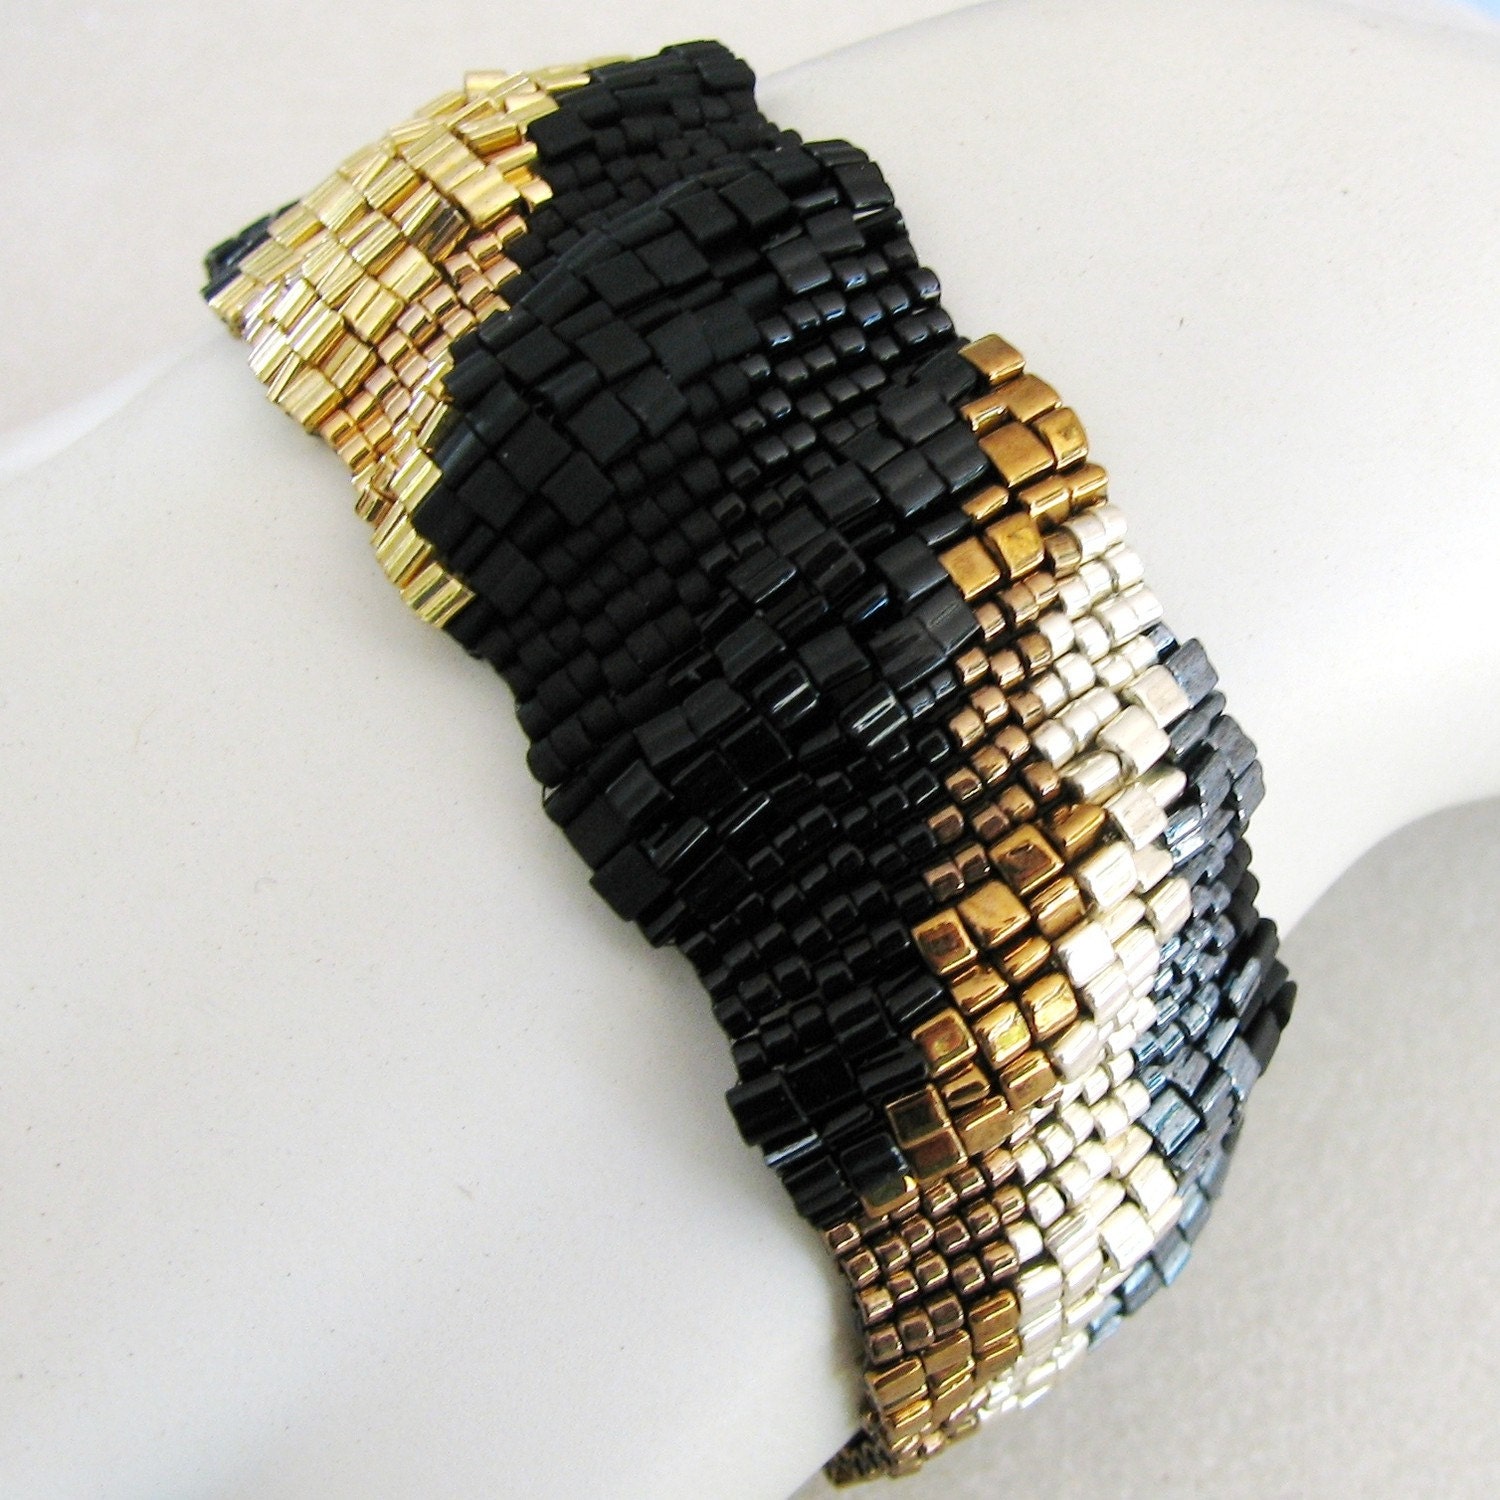 Narrow Corrugated Bands of Black and Metals Peyote Cuff (2533)